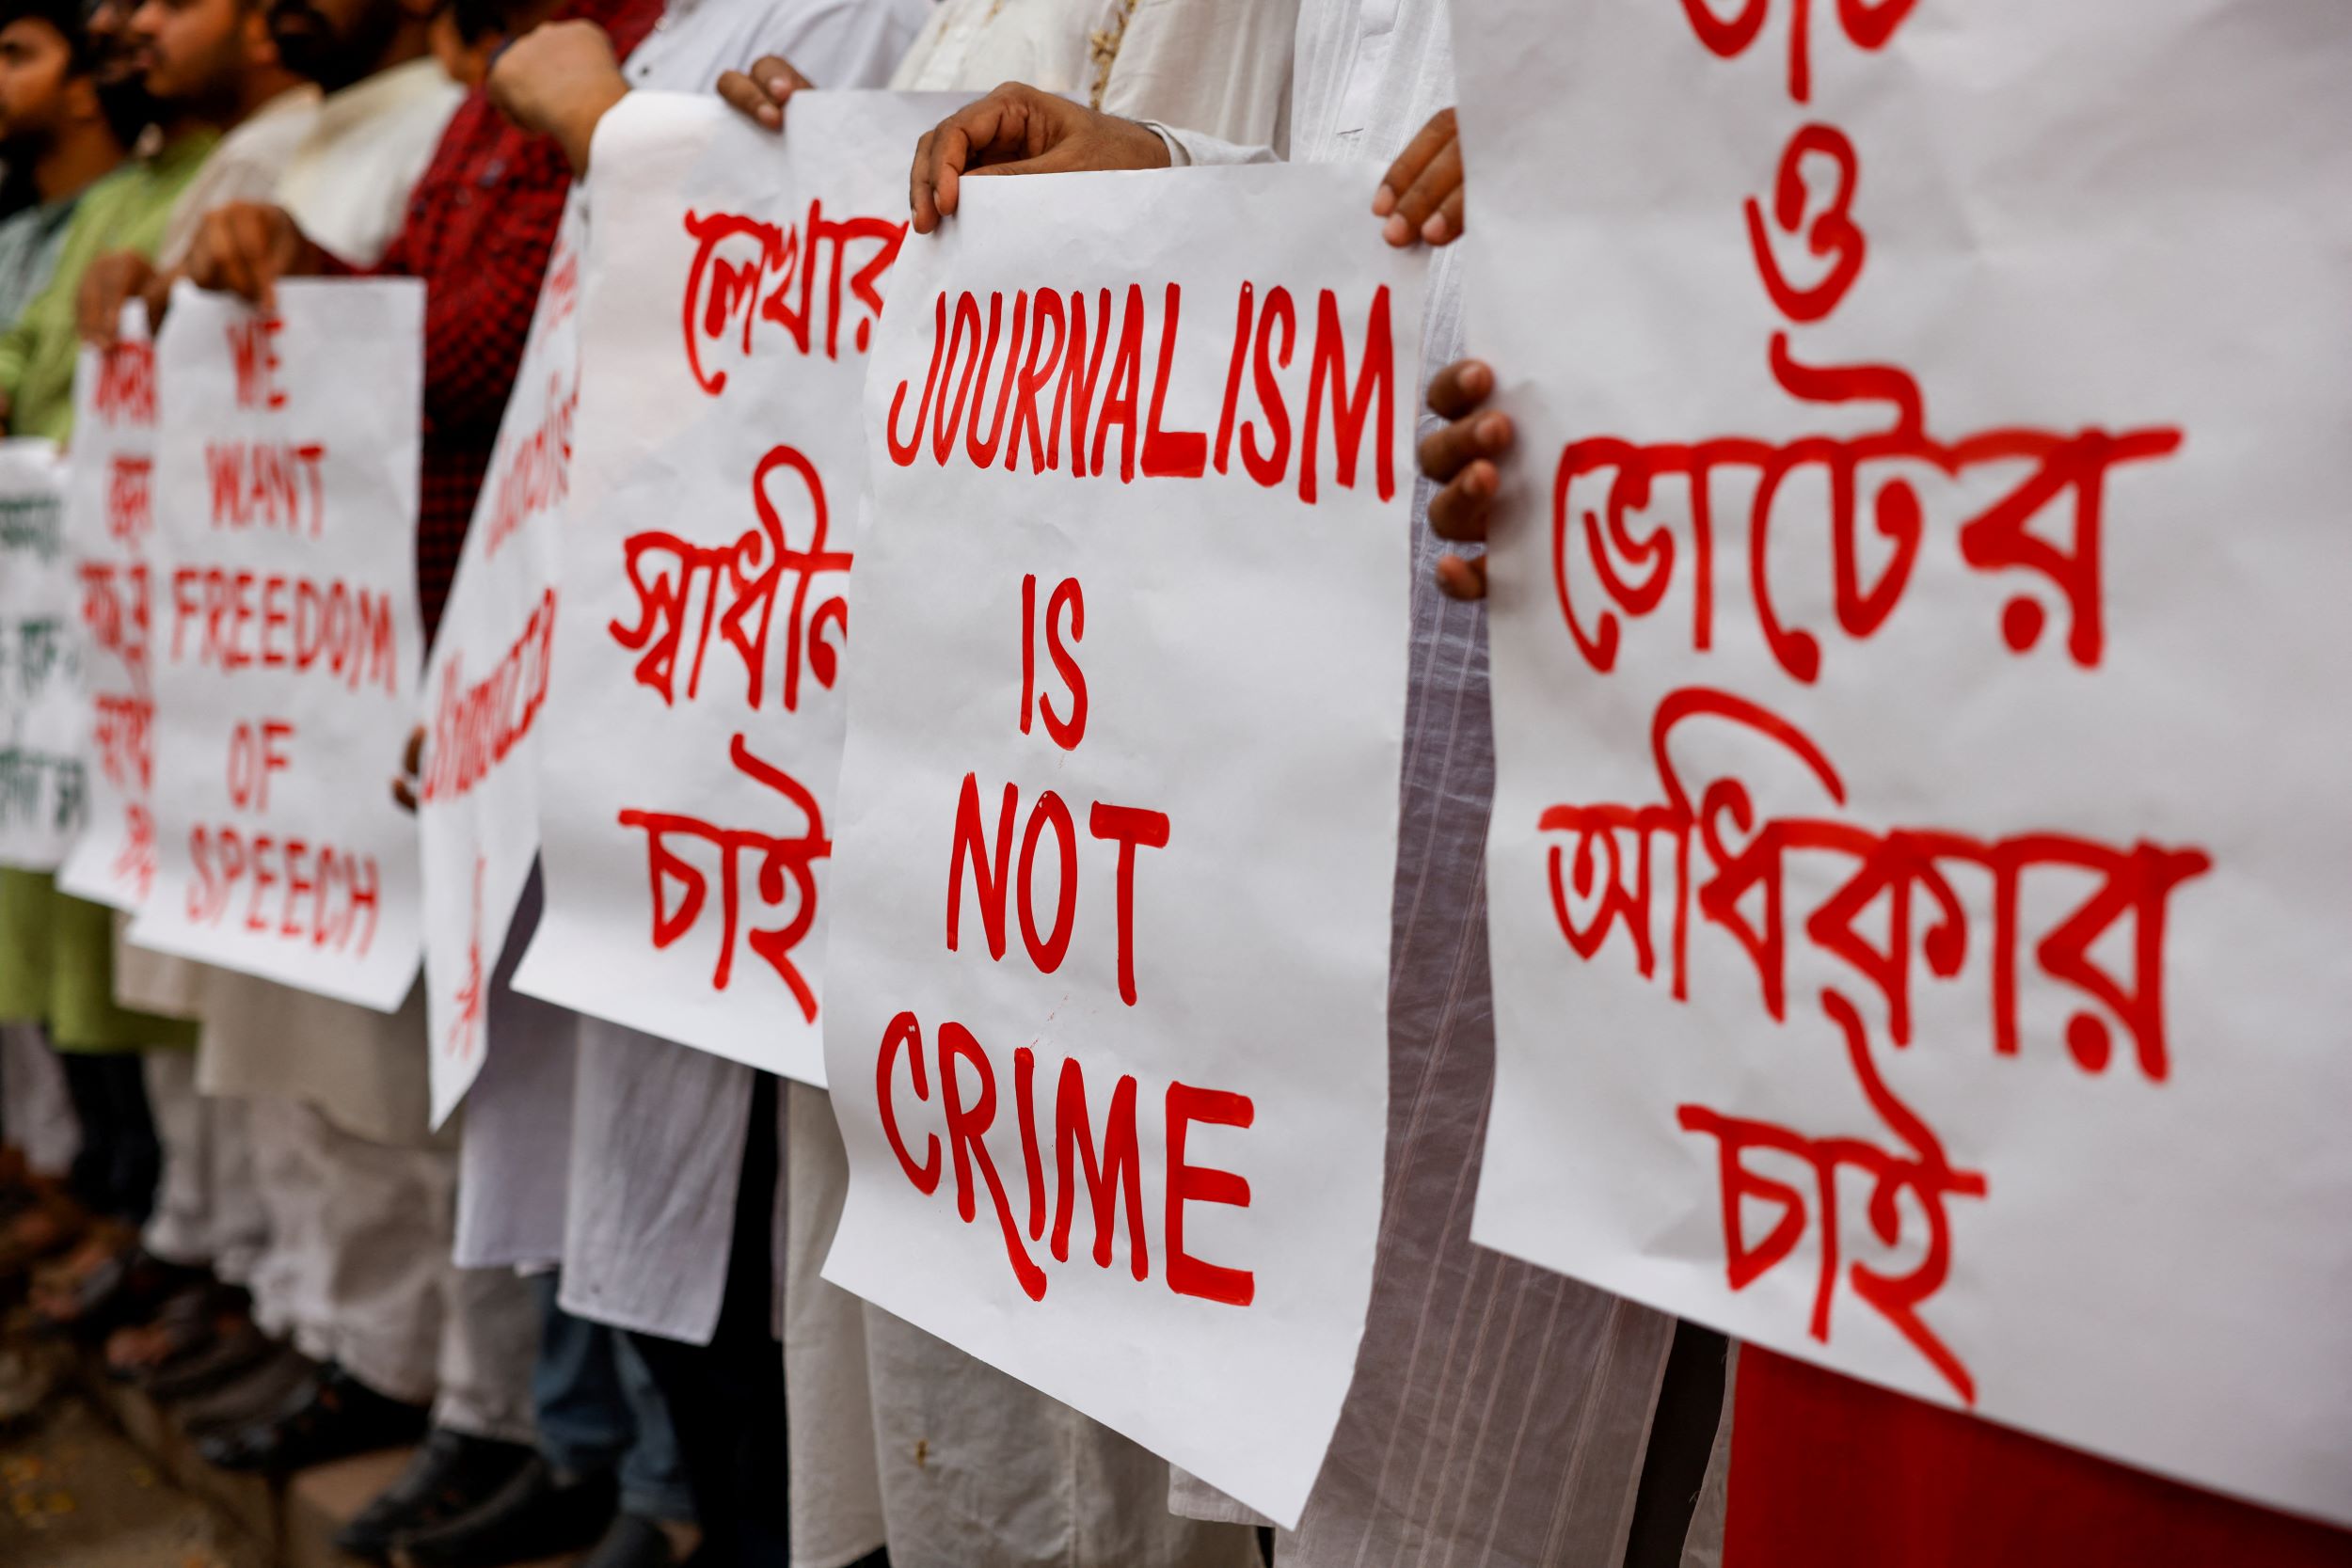 Bangladesh journalism is not a crime gallo